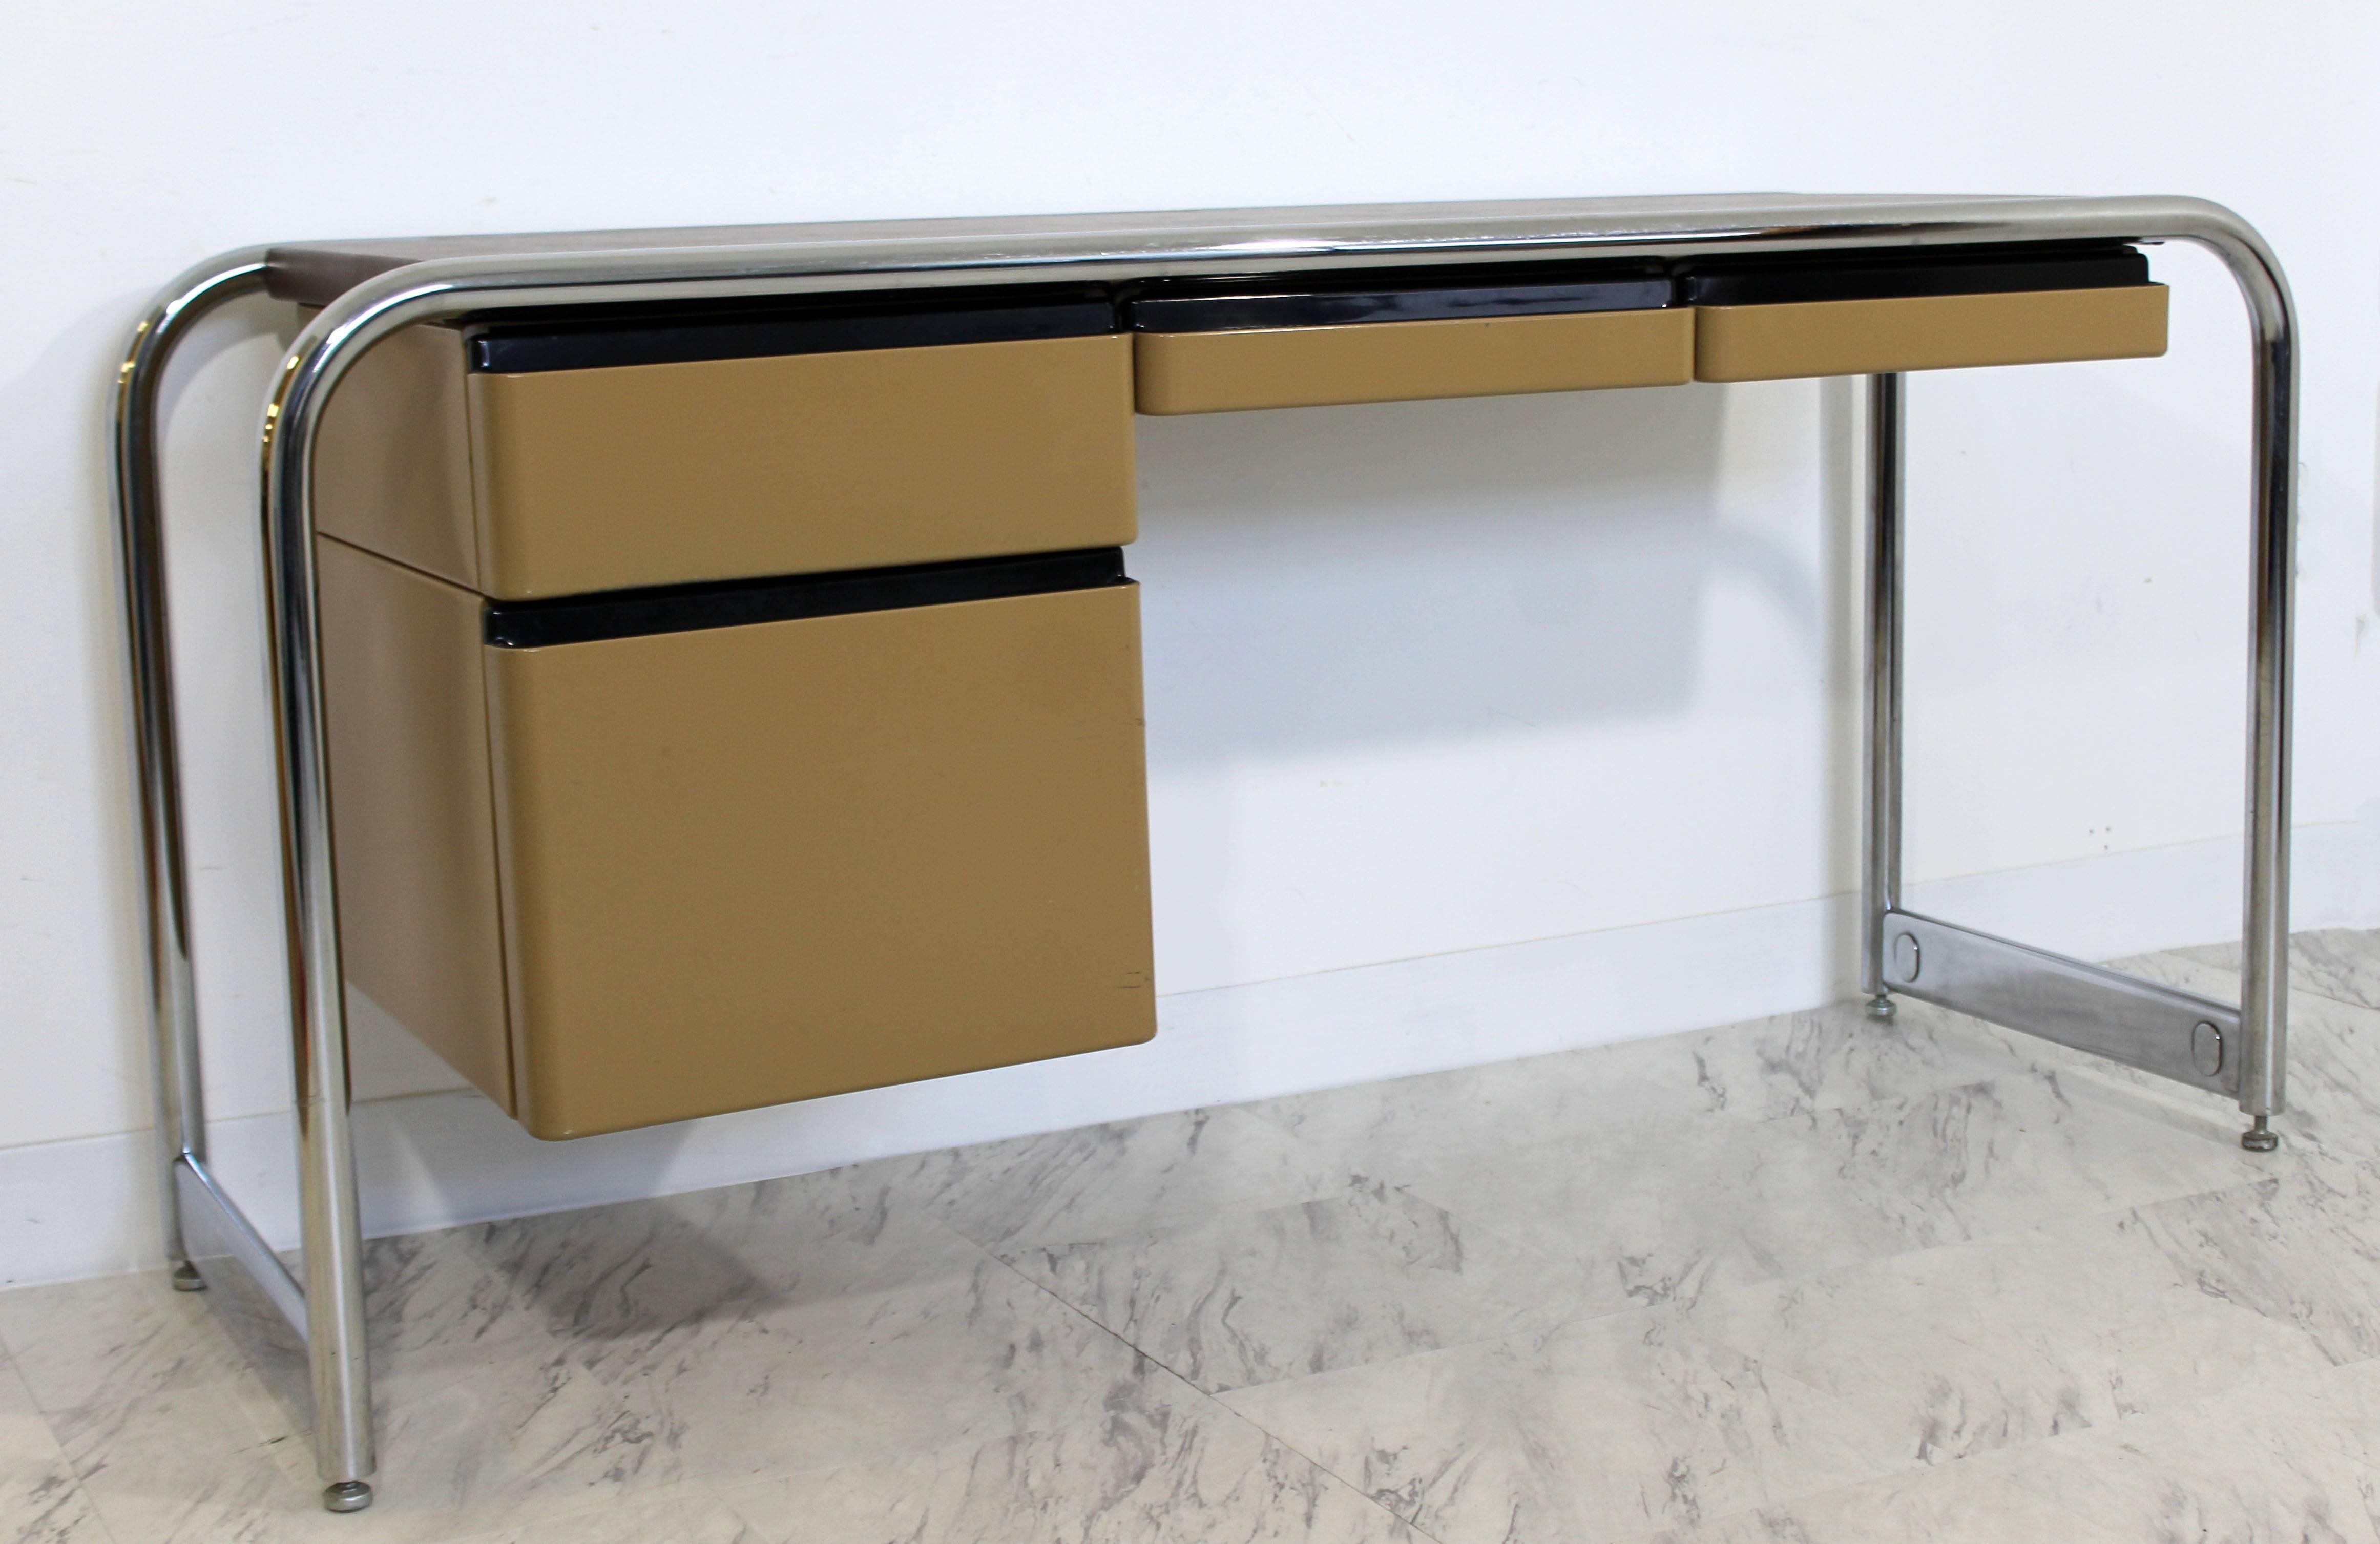 For your consideration is a fantastic, tubular chrome and metal, four drawer desk. With leather top by Michael Graves by Sunar Hauserman In excellent condition. The dimensions are 54